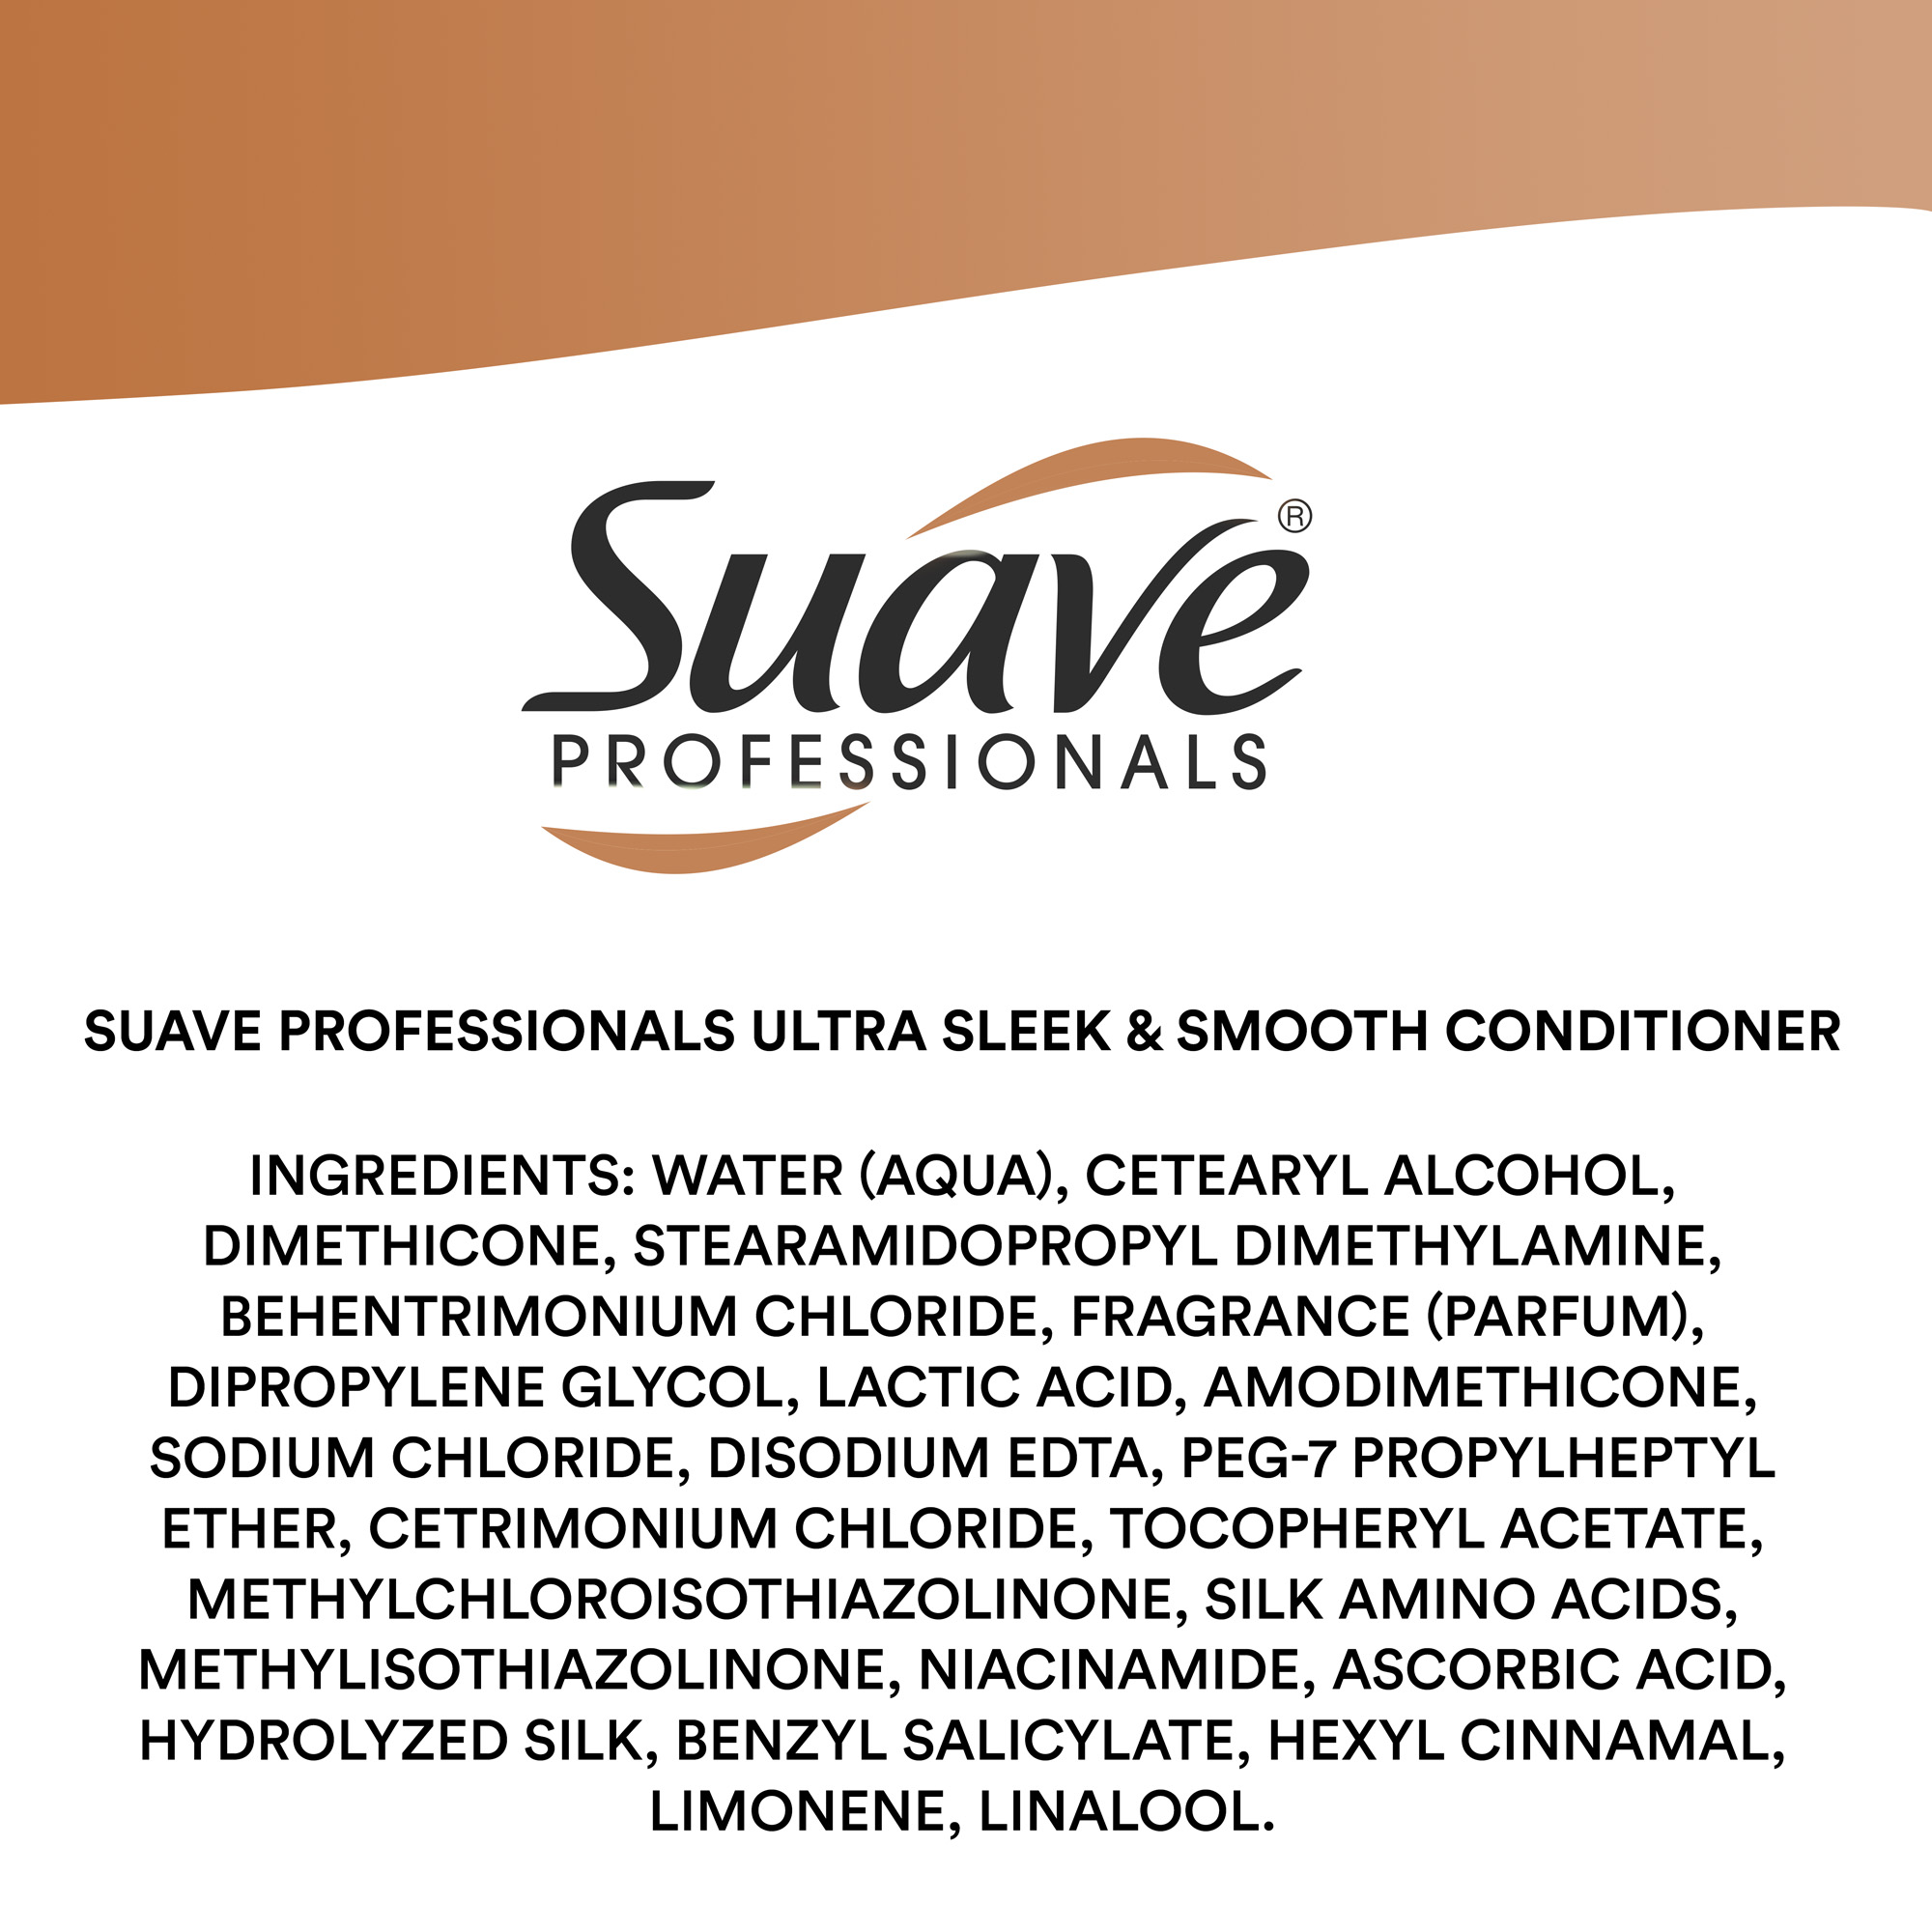 Suave Professionals Clarifying Frizz Control Daily Shampoo & Conditioner with Peptides & Vitamin E, Scented, Full Size Set, 2 Pack - image 5 of 11